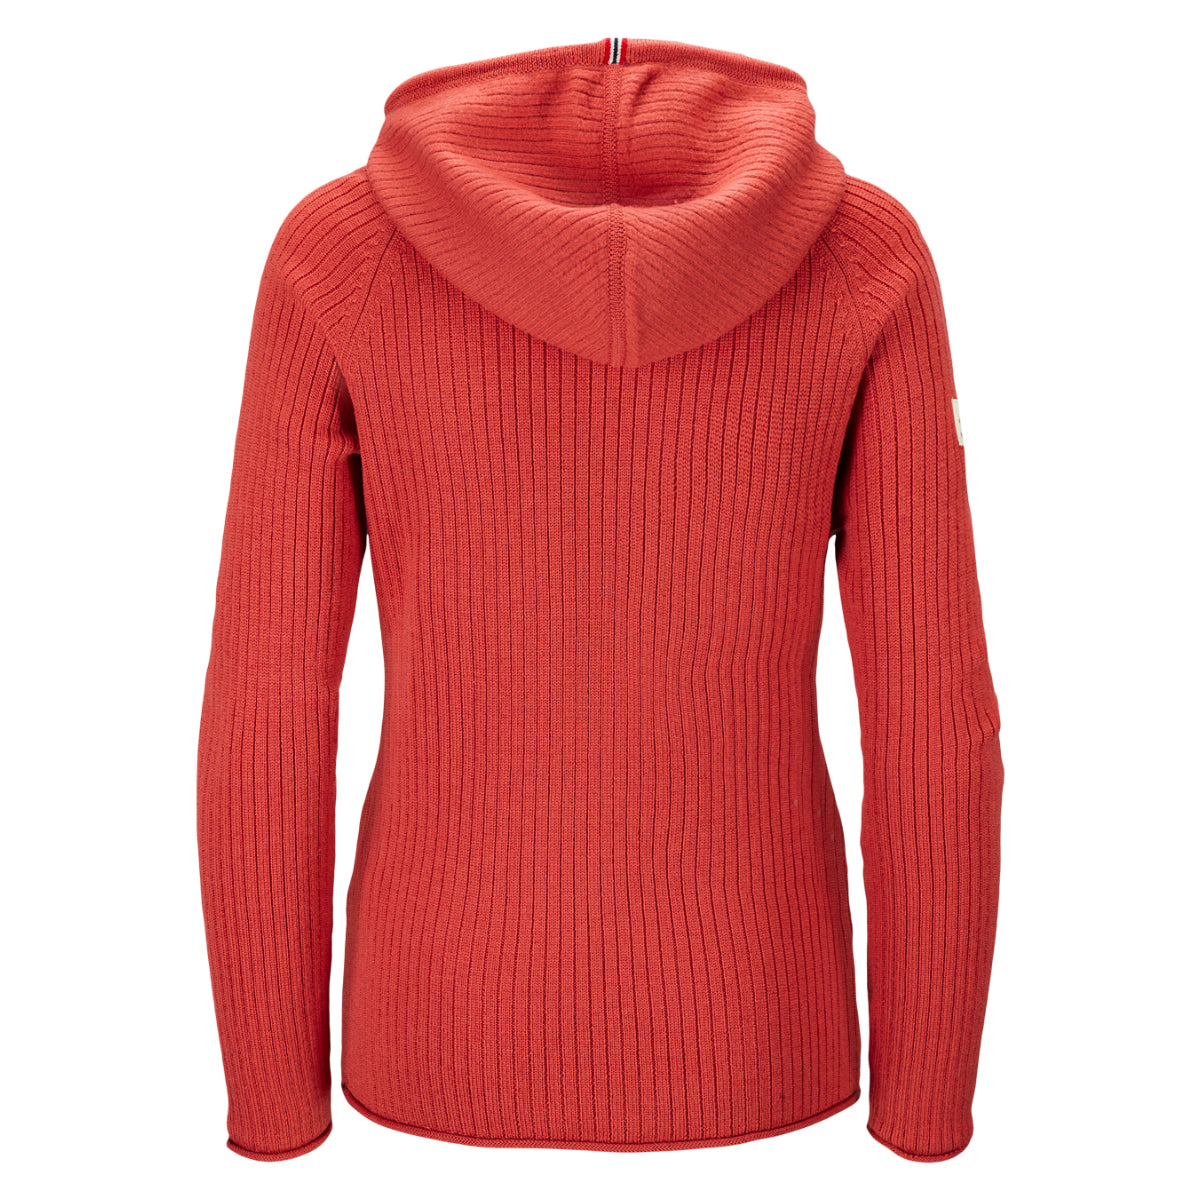 Amundsen Sports - Women's Boiled Hoodie - Weathered Red